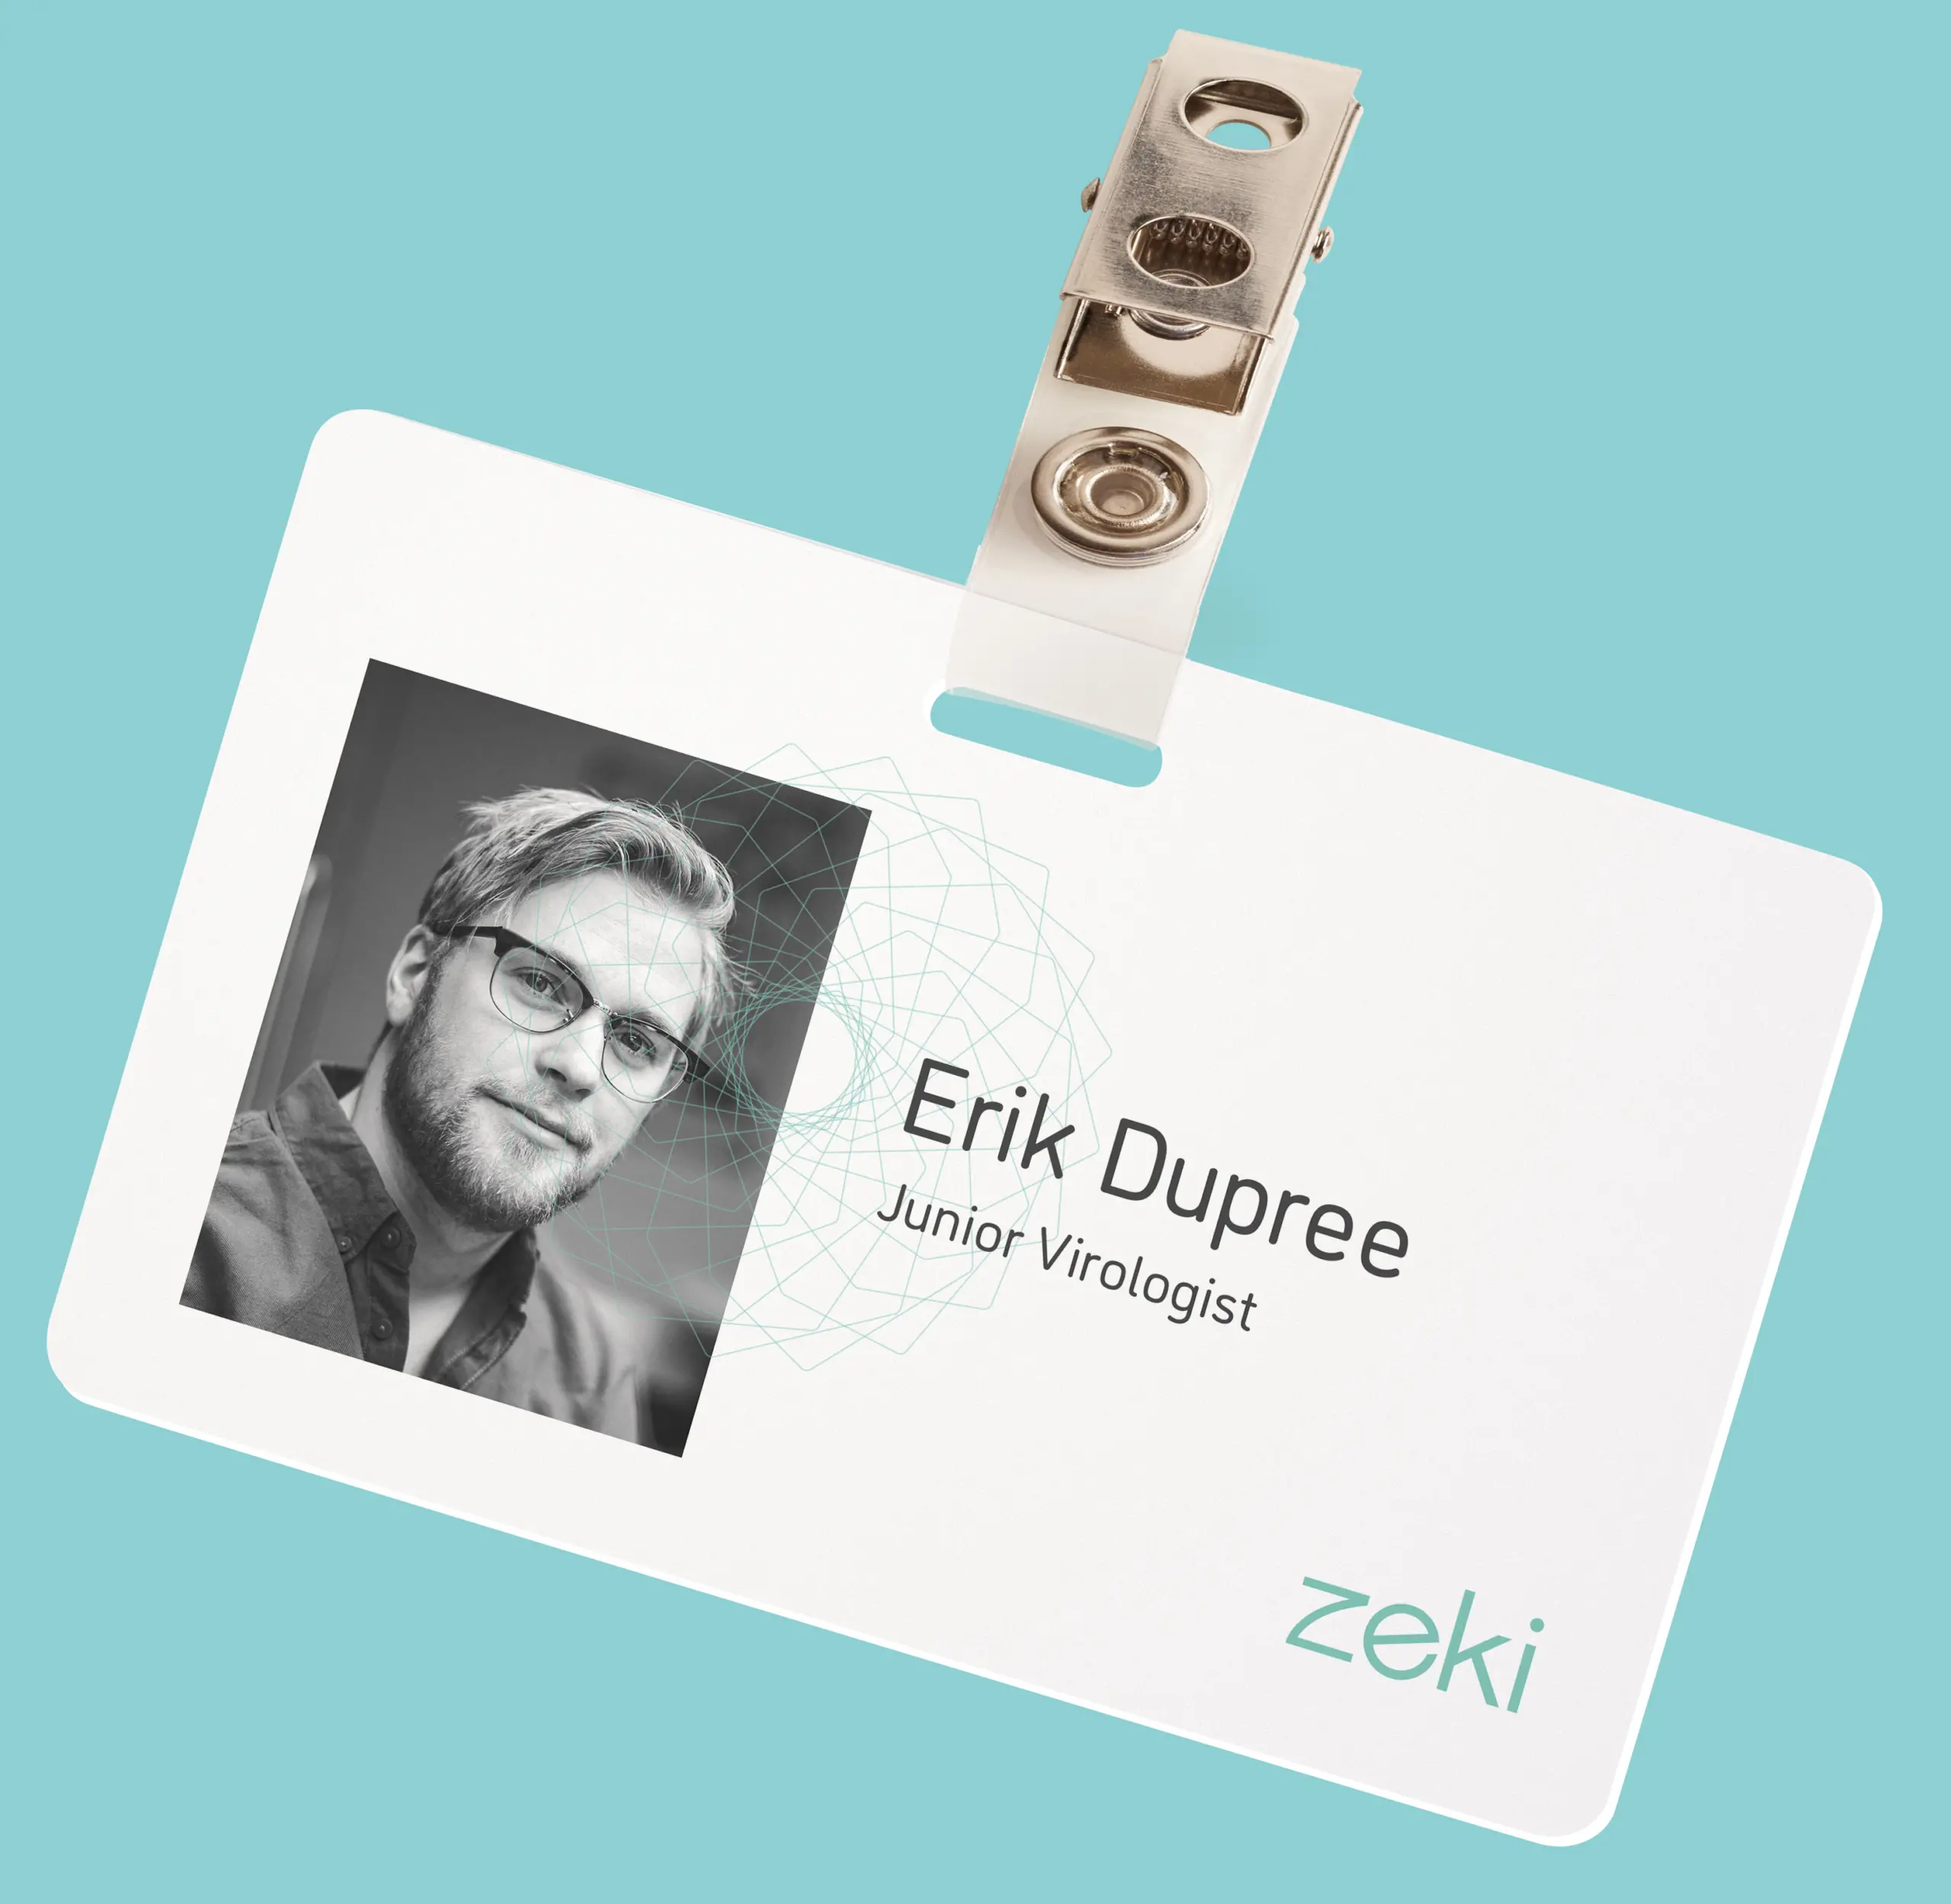 A white identification badge reads "Erik Dupree, Junior Virologist" in black text. The badge has a portrait of a bearded man wearing glasses on the left side. A metal clip is attached to the top of the badge, and the logo "zeki" is printed at the bottom right.